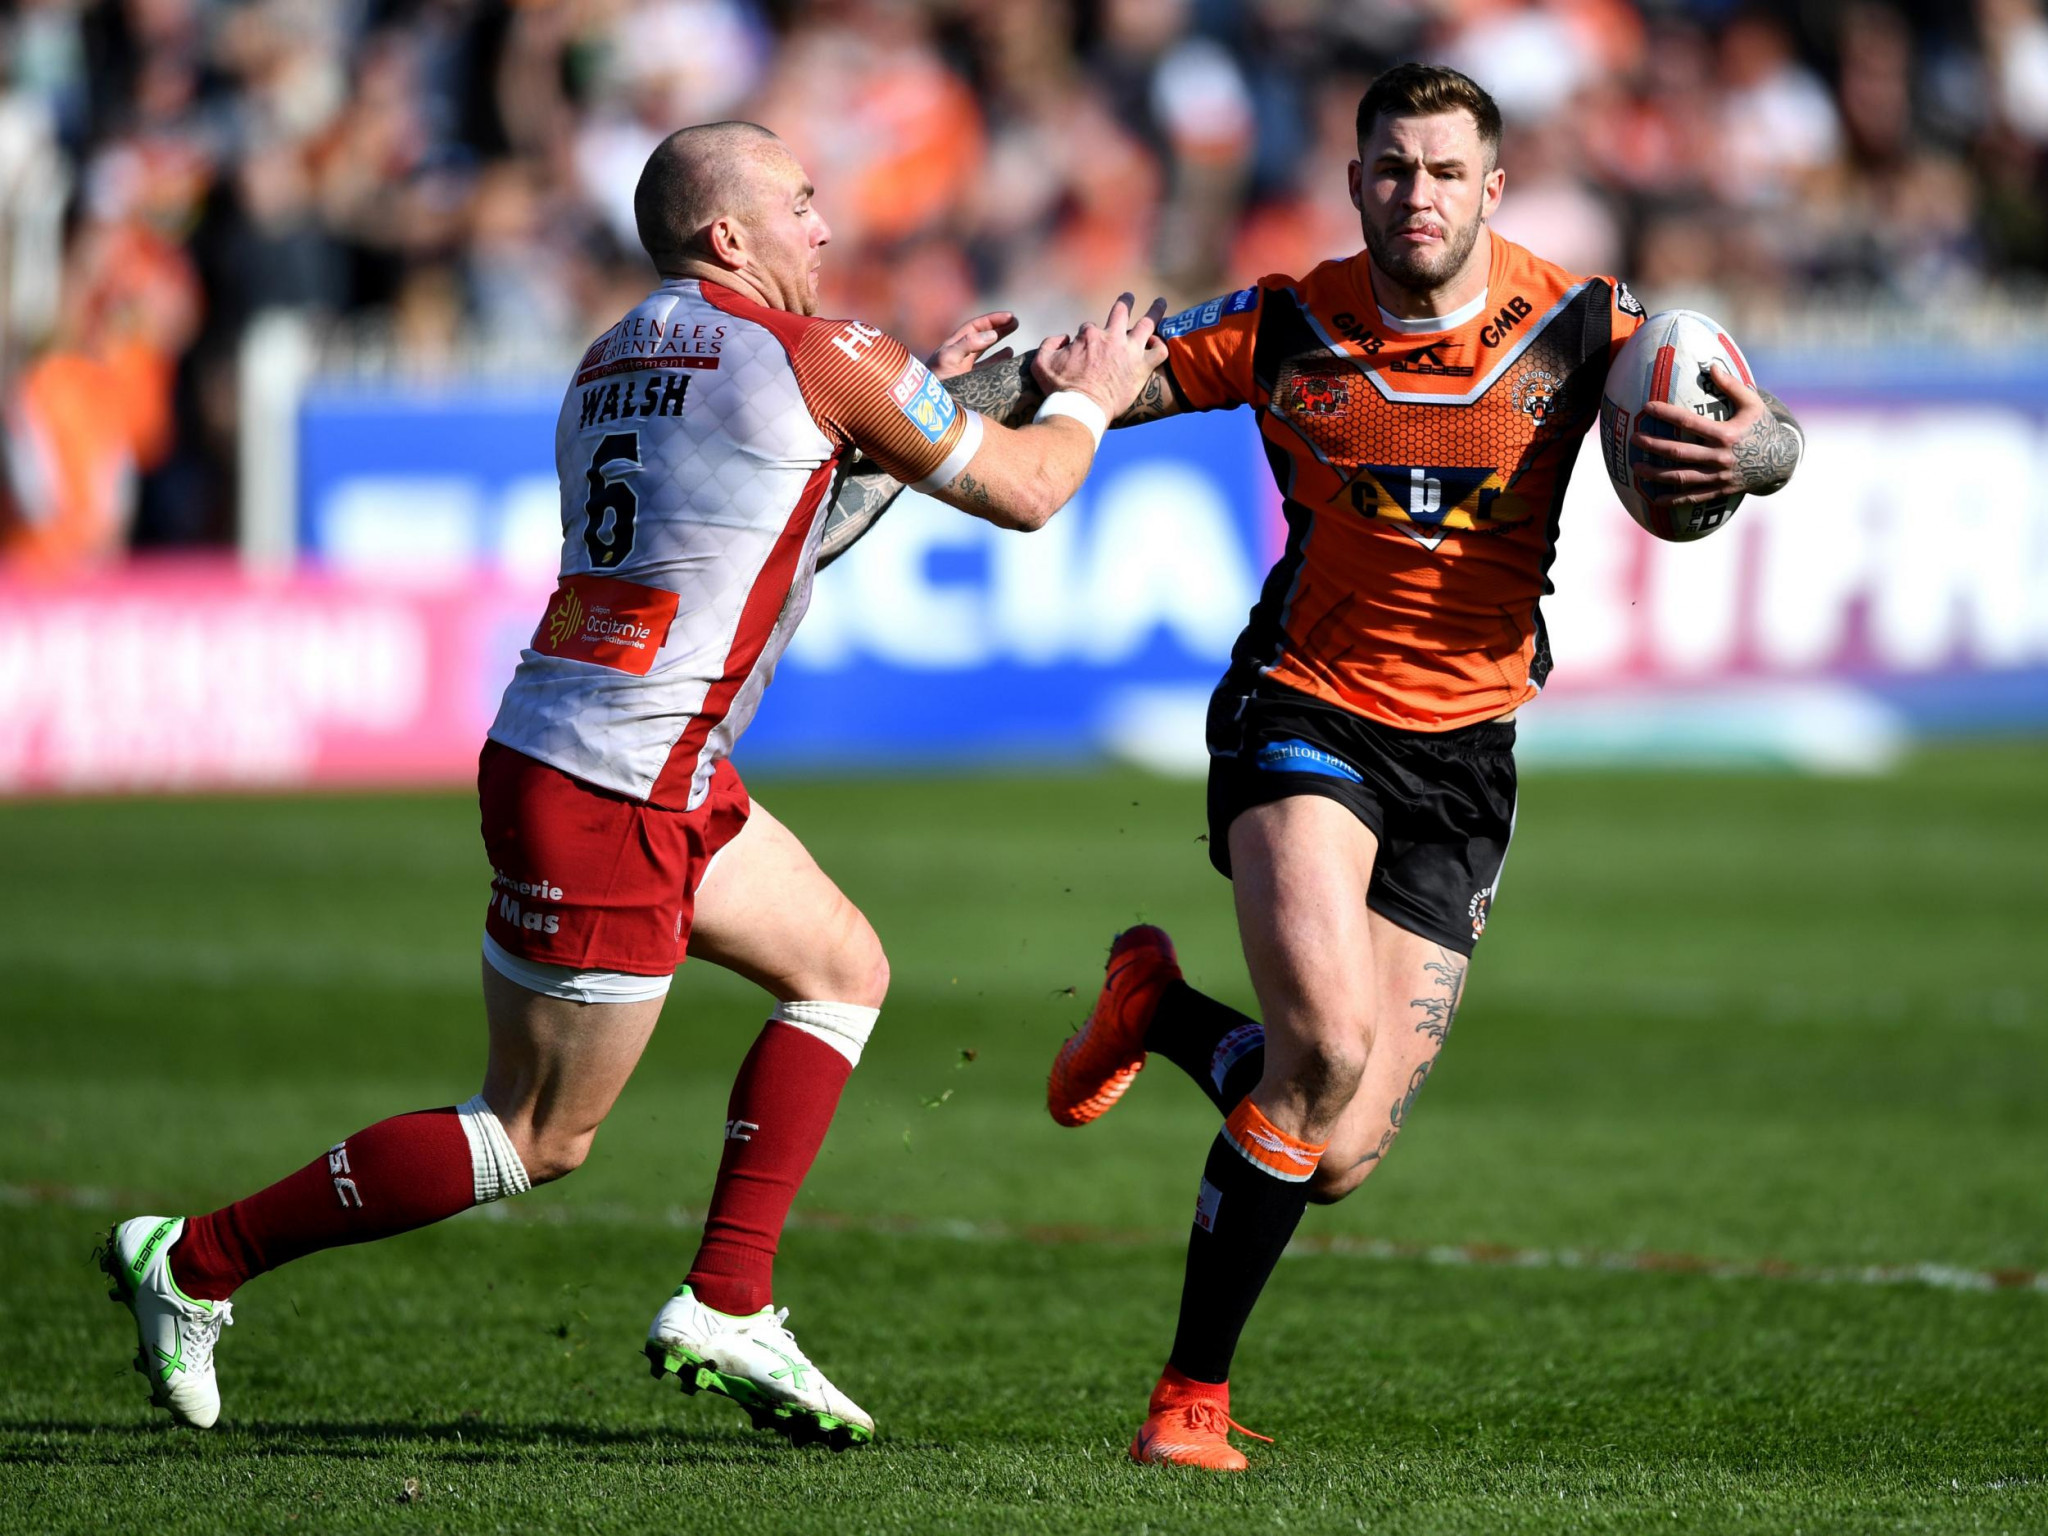 Zak Hardaker, right, was dropped by Castleford Tigers before the Super League Grand Final against his former club Leeds Rhinos for an unspecified breach of discipline before it was revealed he had tested positive for cocaine ©Getty Images